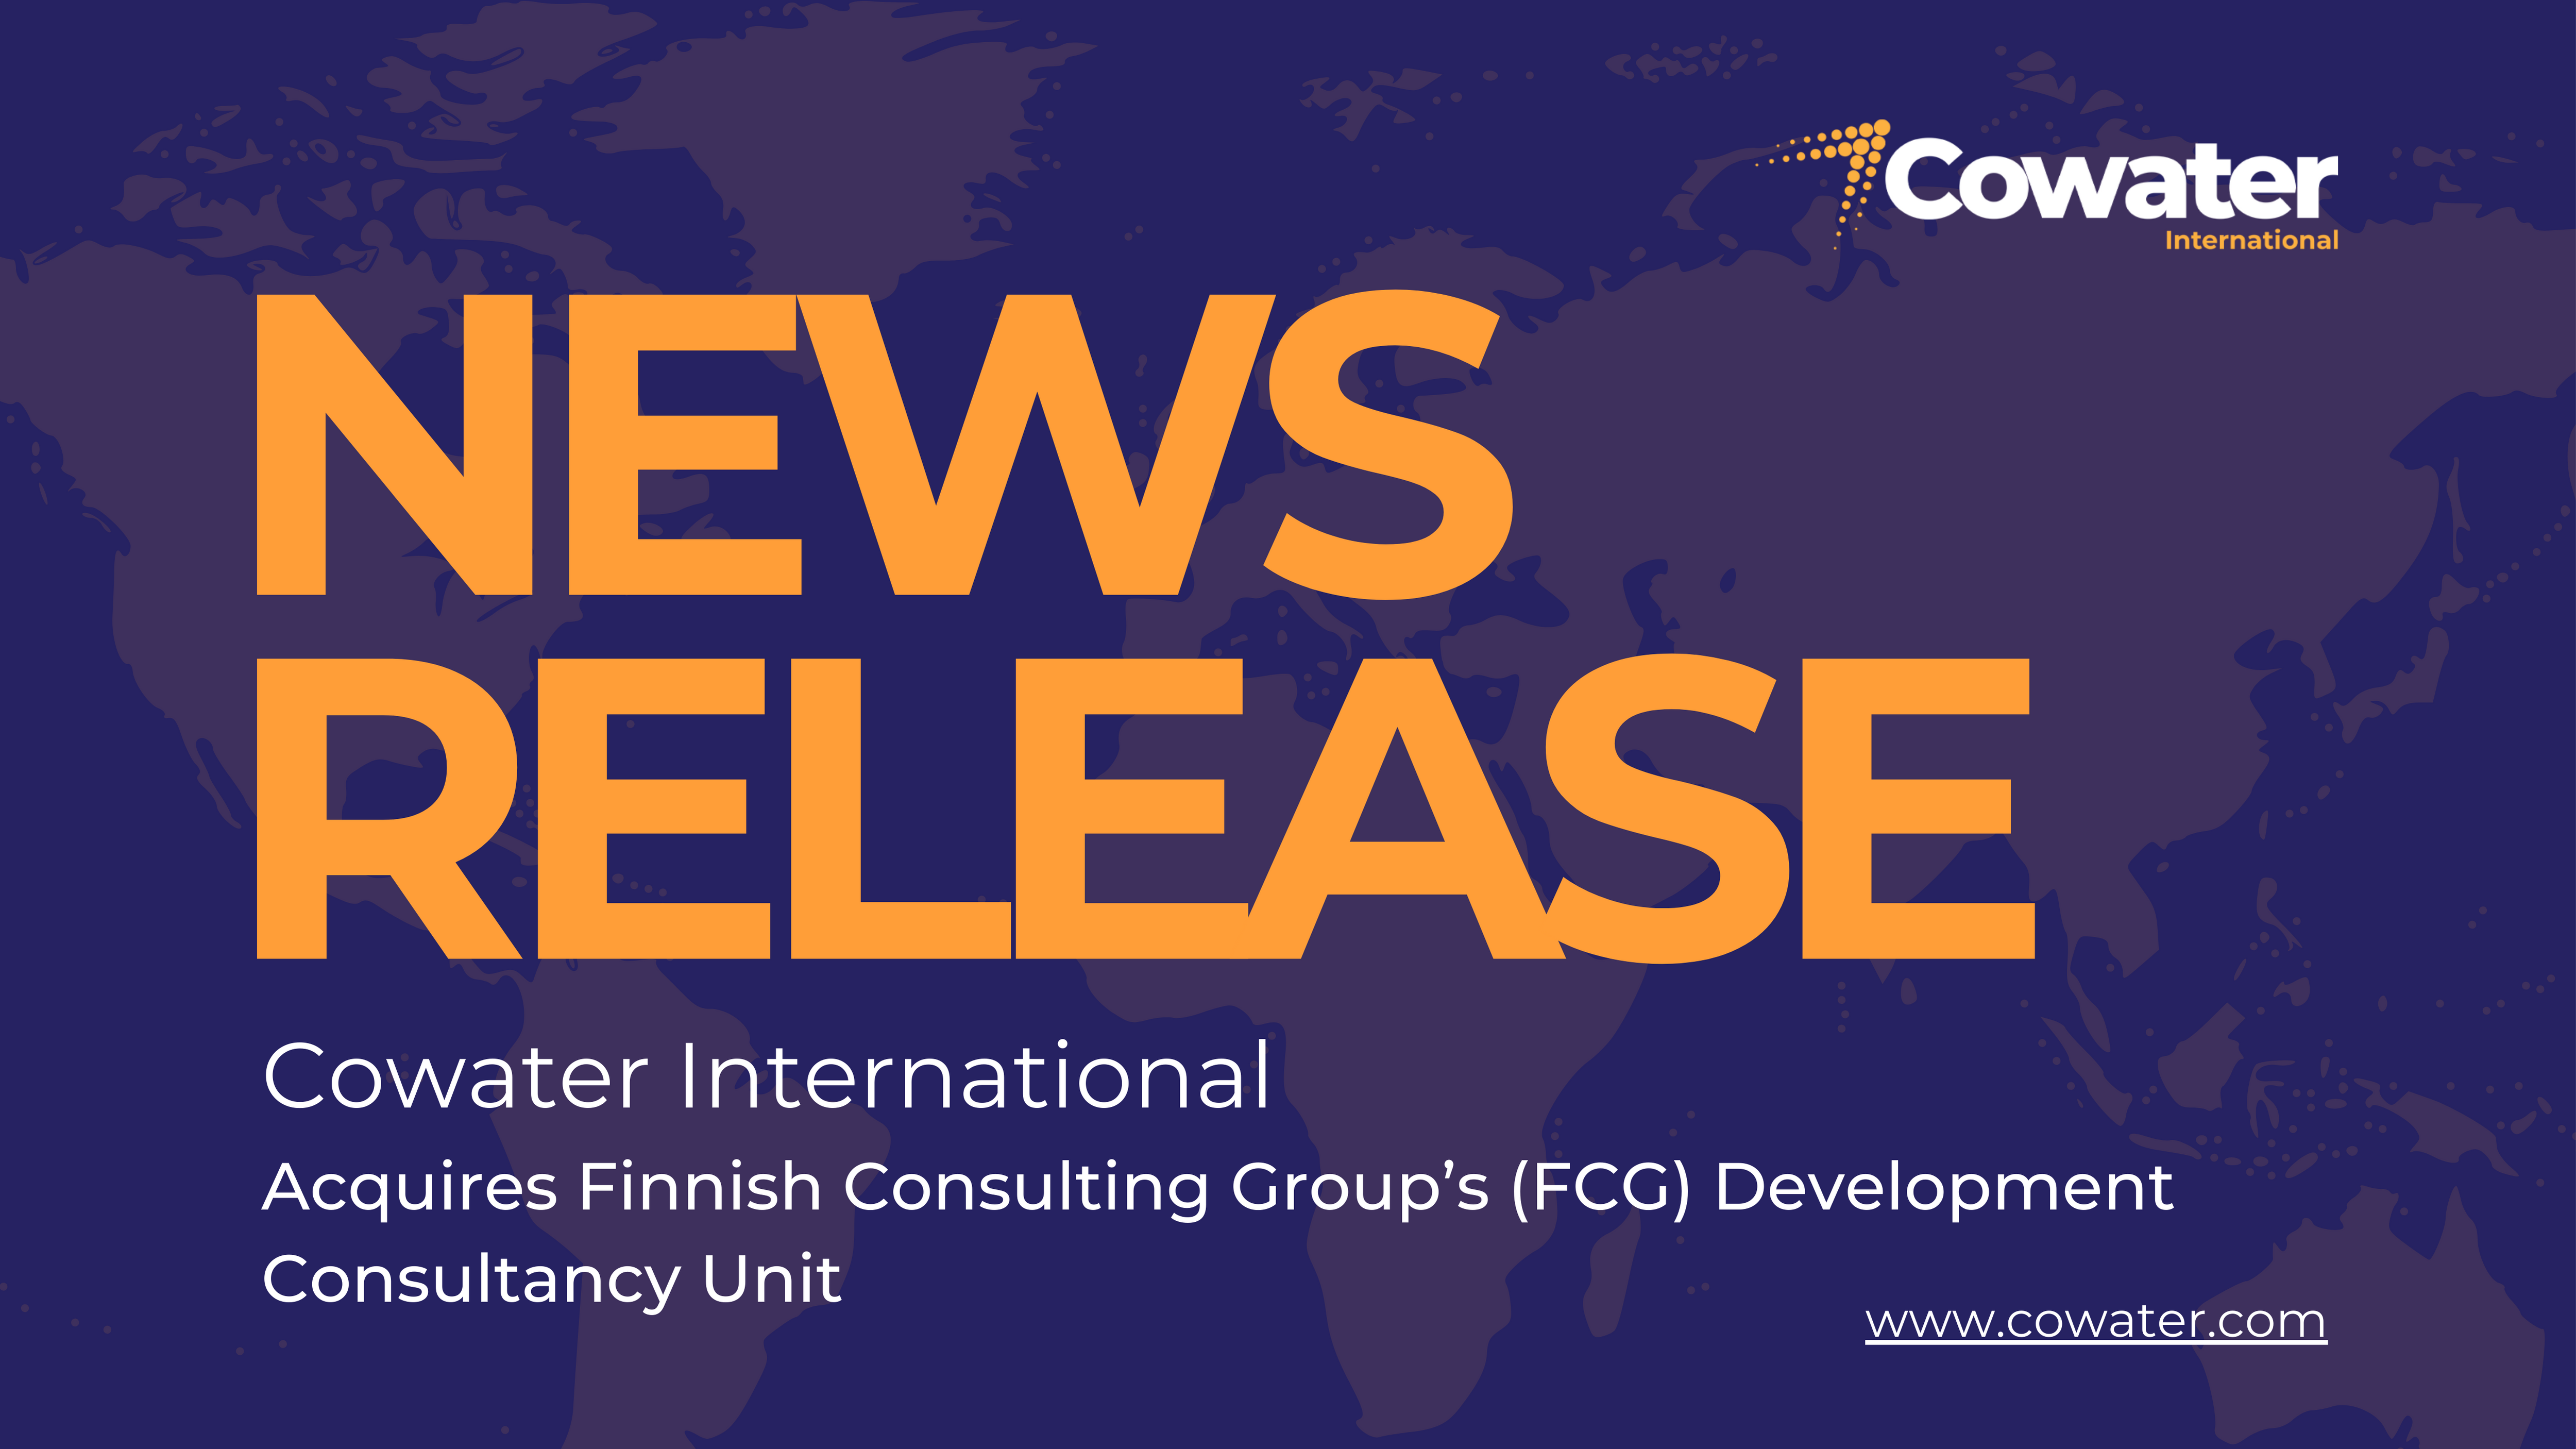 Cowater International Acquires Finnish Consulting Group’s (FCG) Development Consultancy Unit